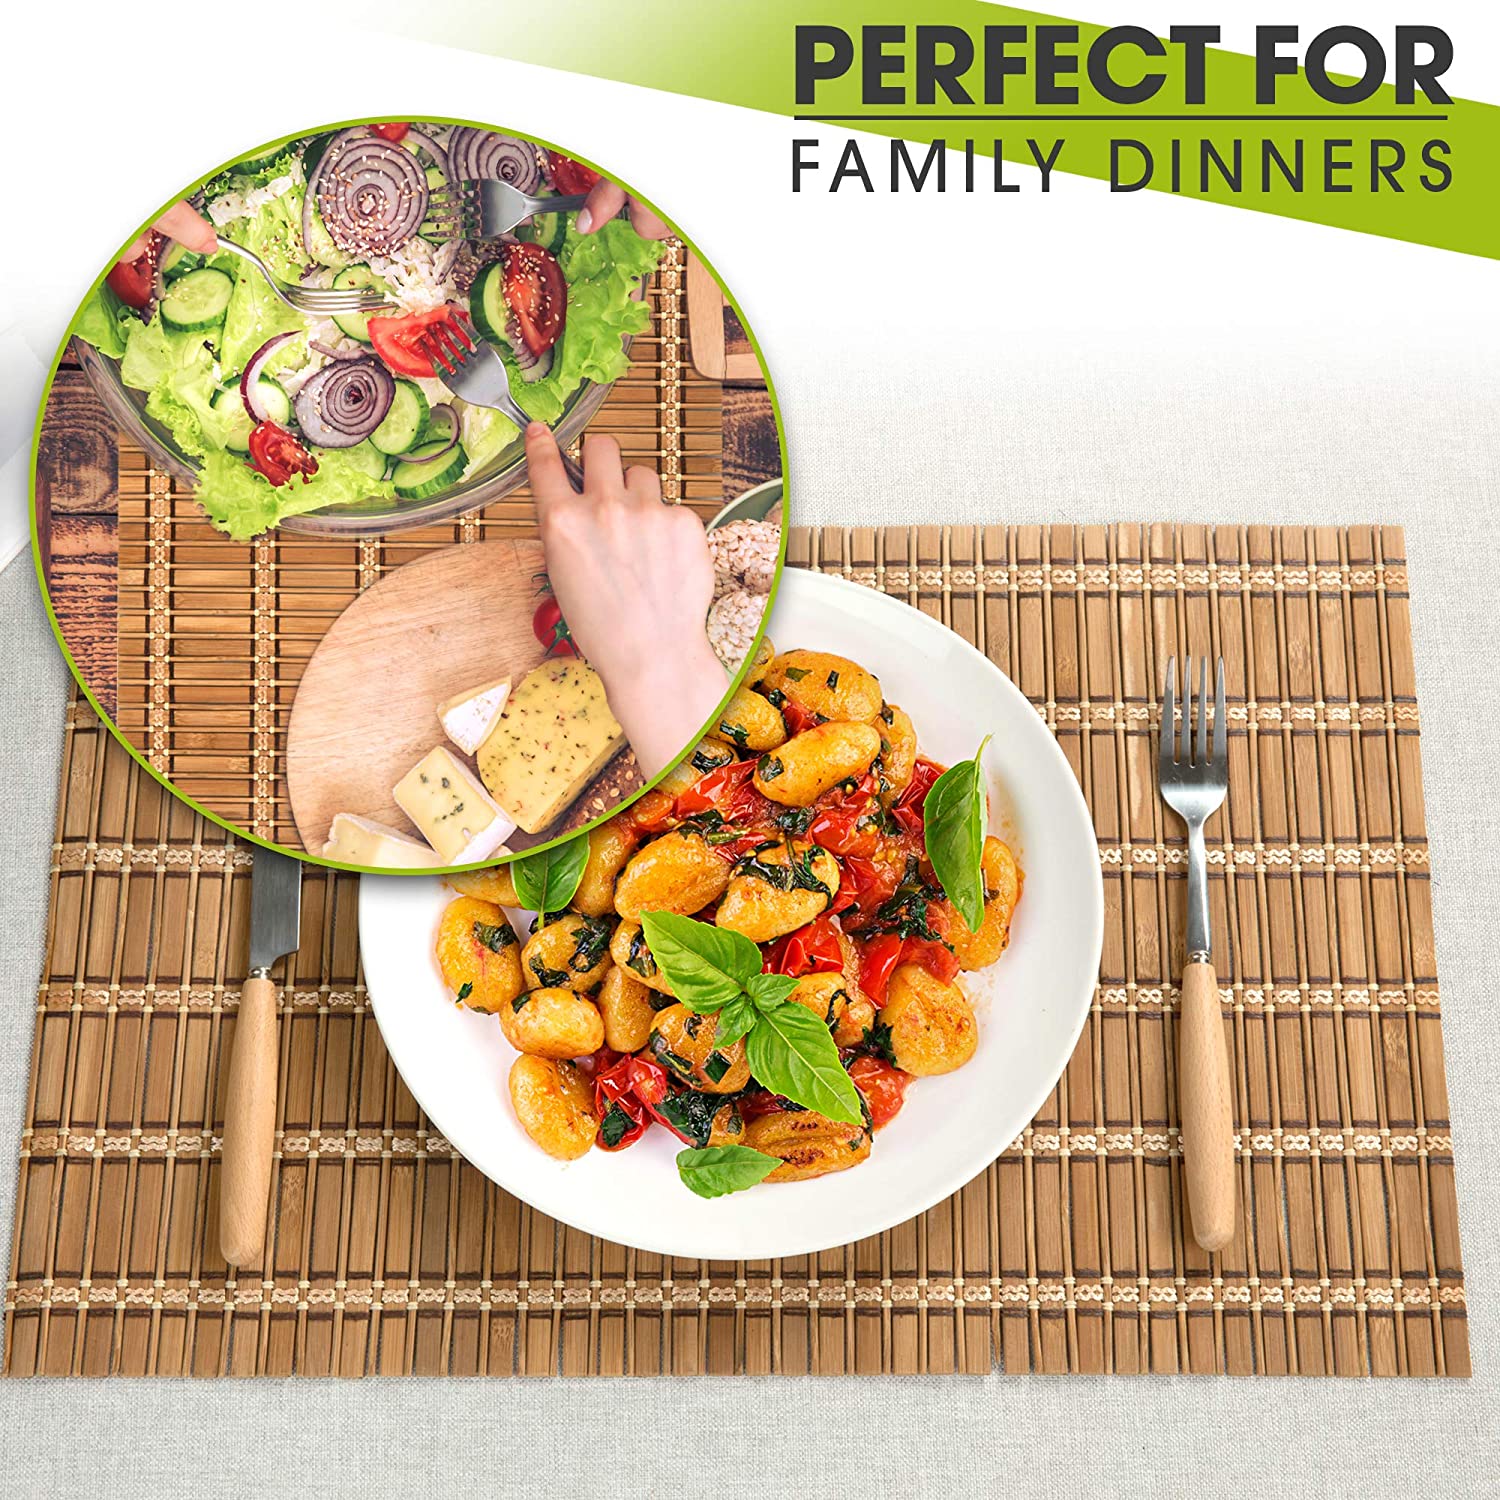 Bamboo Placemats – 4 pcs Table Runner